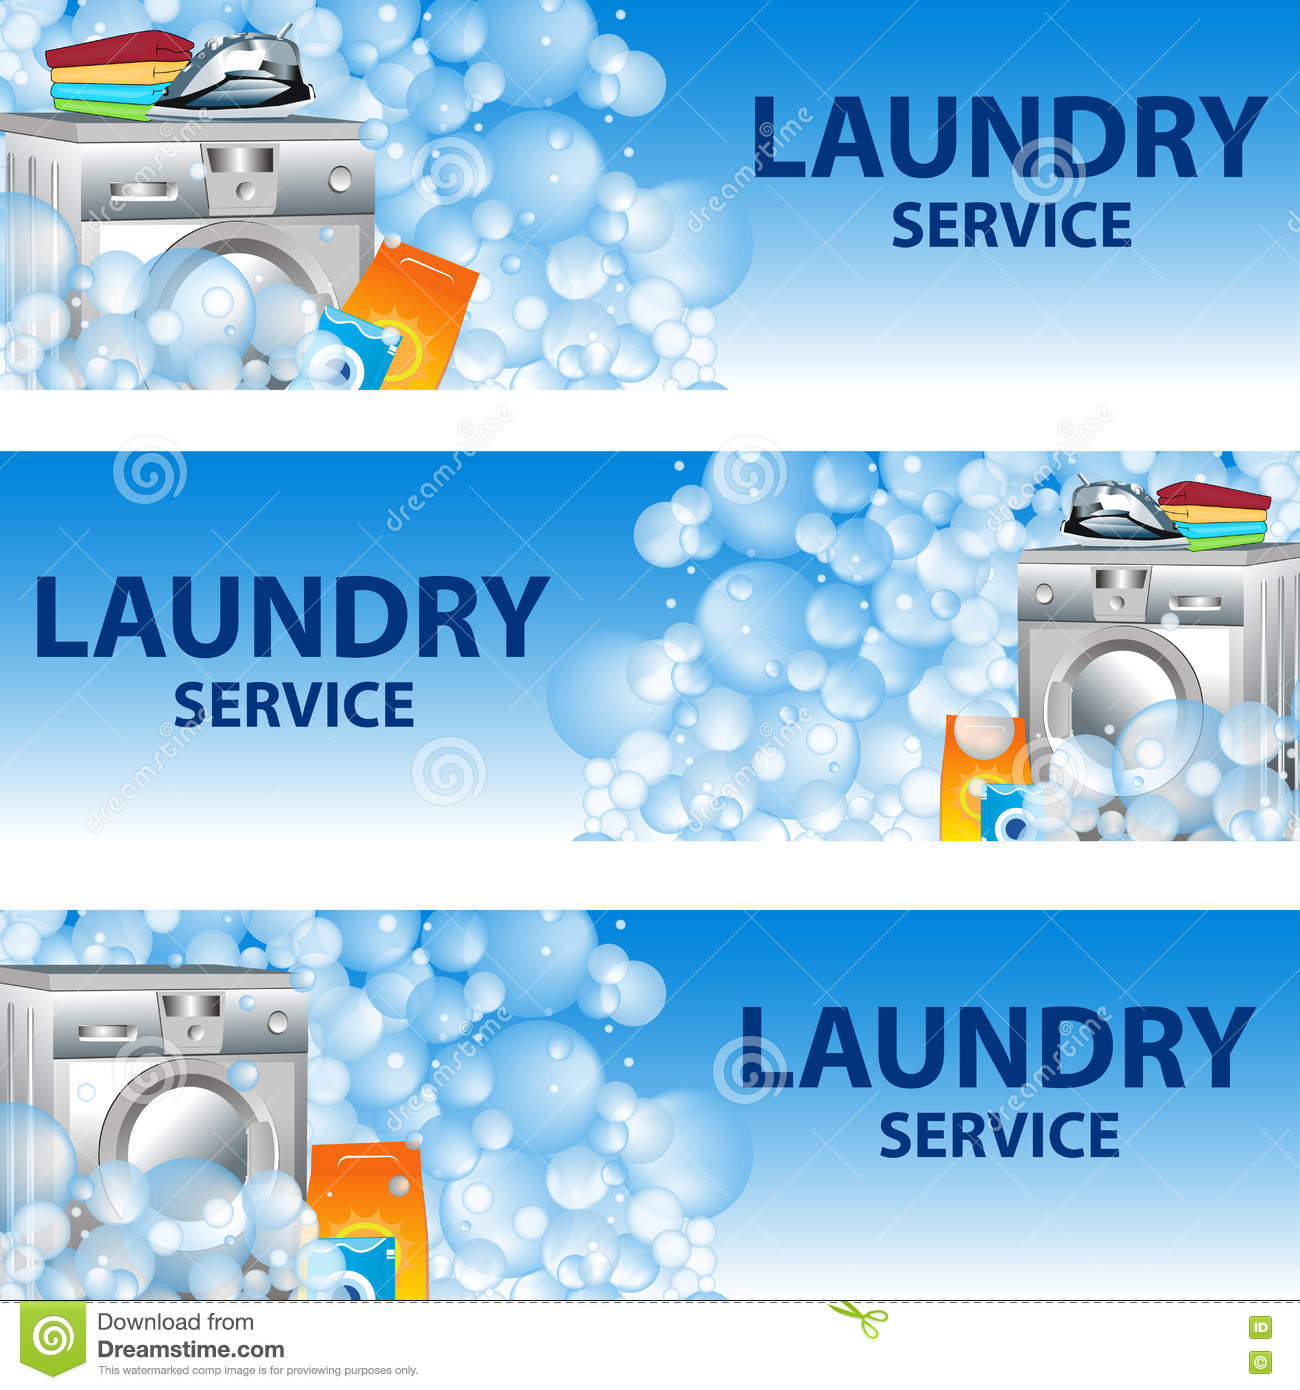 Set Banners Laundry Service. Poster Template For House Regarding House Cleaning Services Flyer Templates